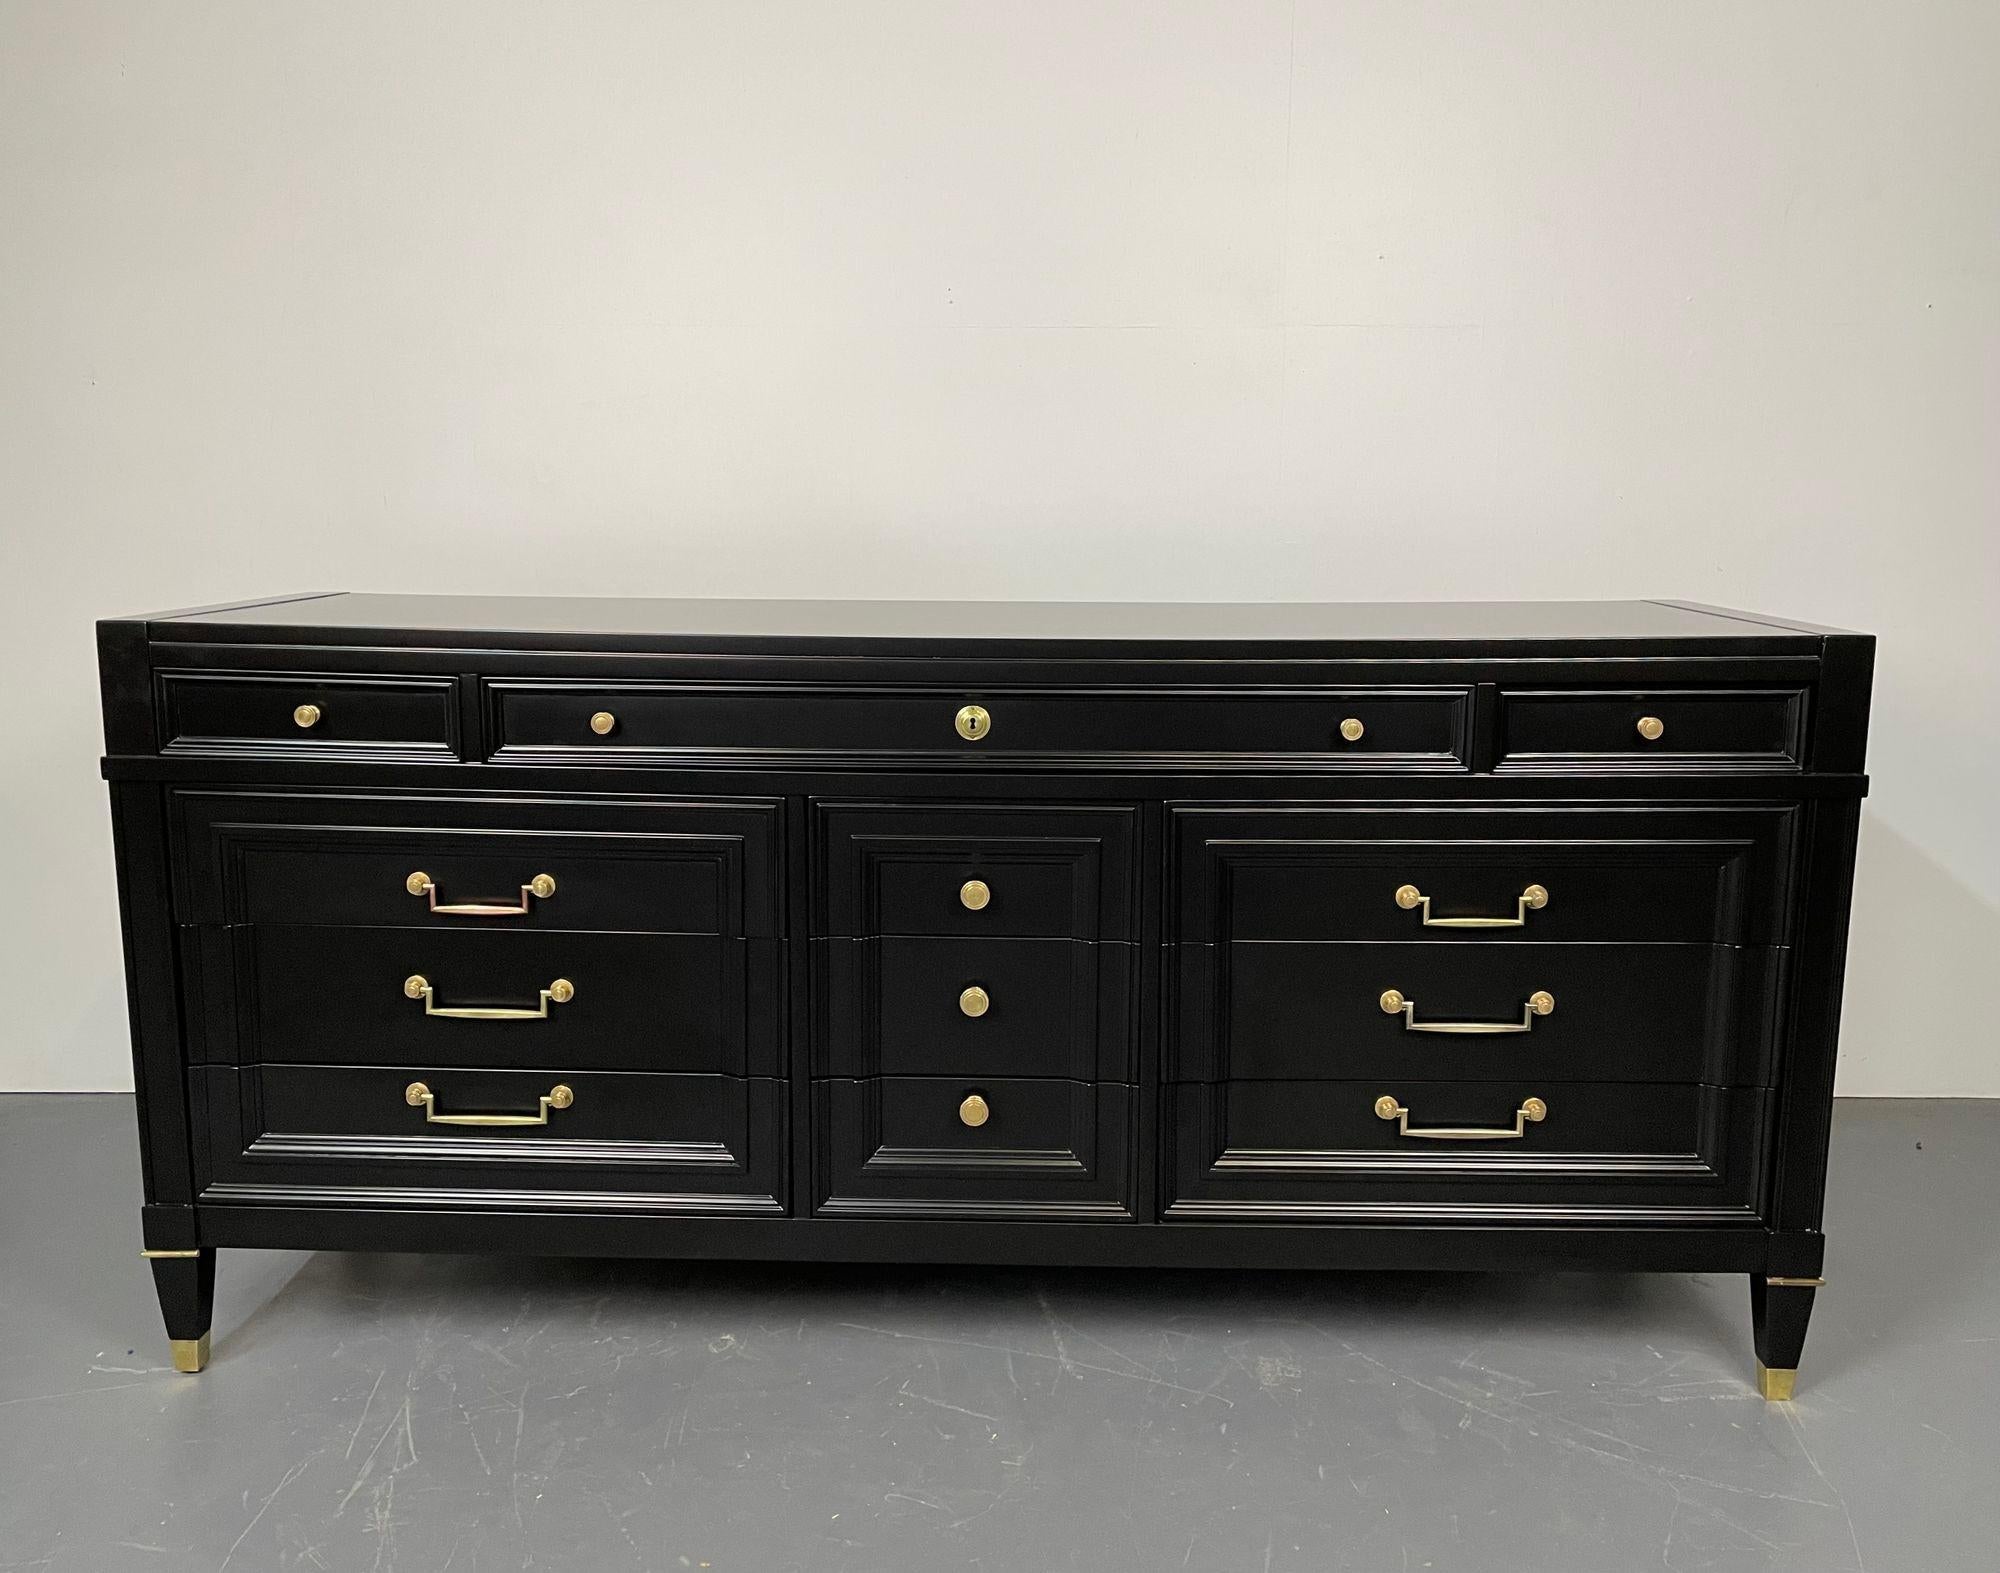 Hollywood Regency Ebony dresser, 12 drawer, Refinished
A Stunning Ebony dresser, sideboard or chest having a rare grouping of 12 drawers each with bronze drawer pulls in the Maison Jansen Style. The tapering legs have bronze sabots and terminals